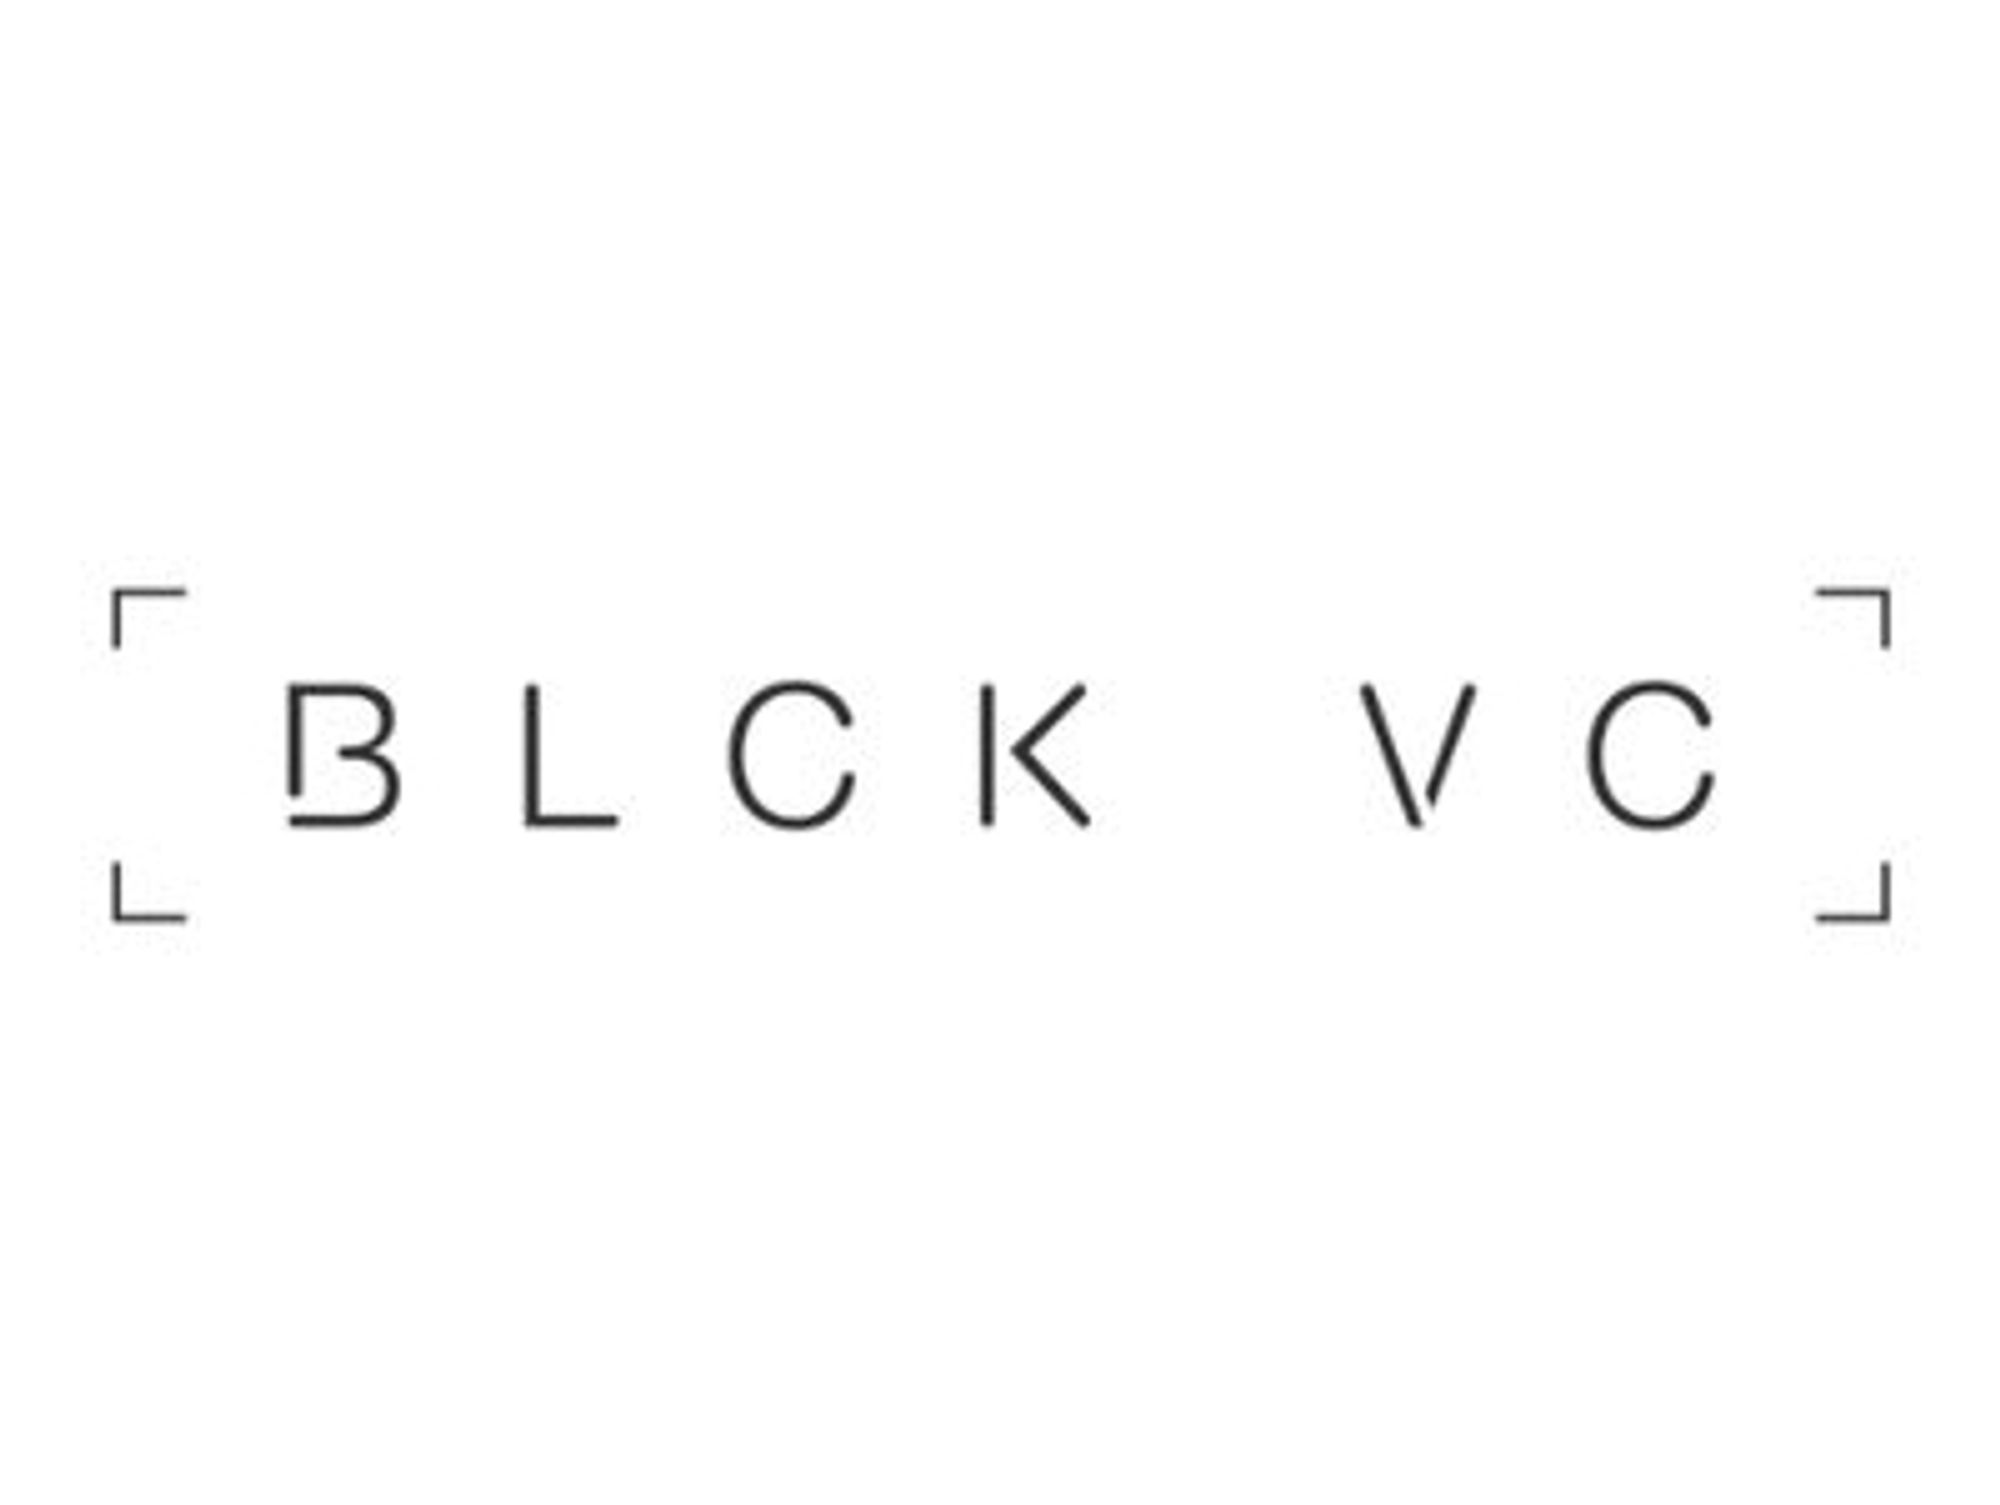 Blck VC Group L​aunches 'We Won't Wait' Campaign Pushing for Diversity in Investing Groups